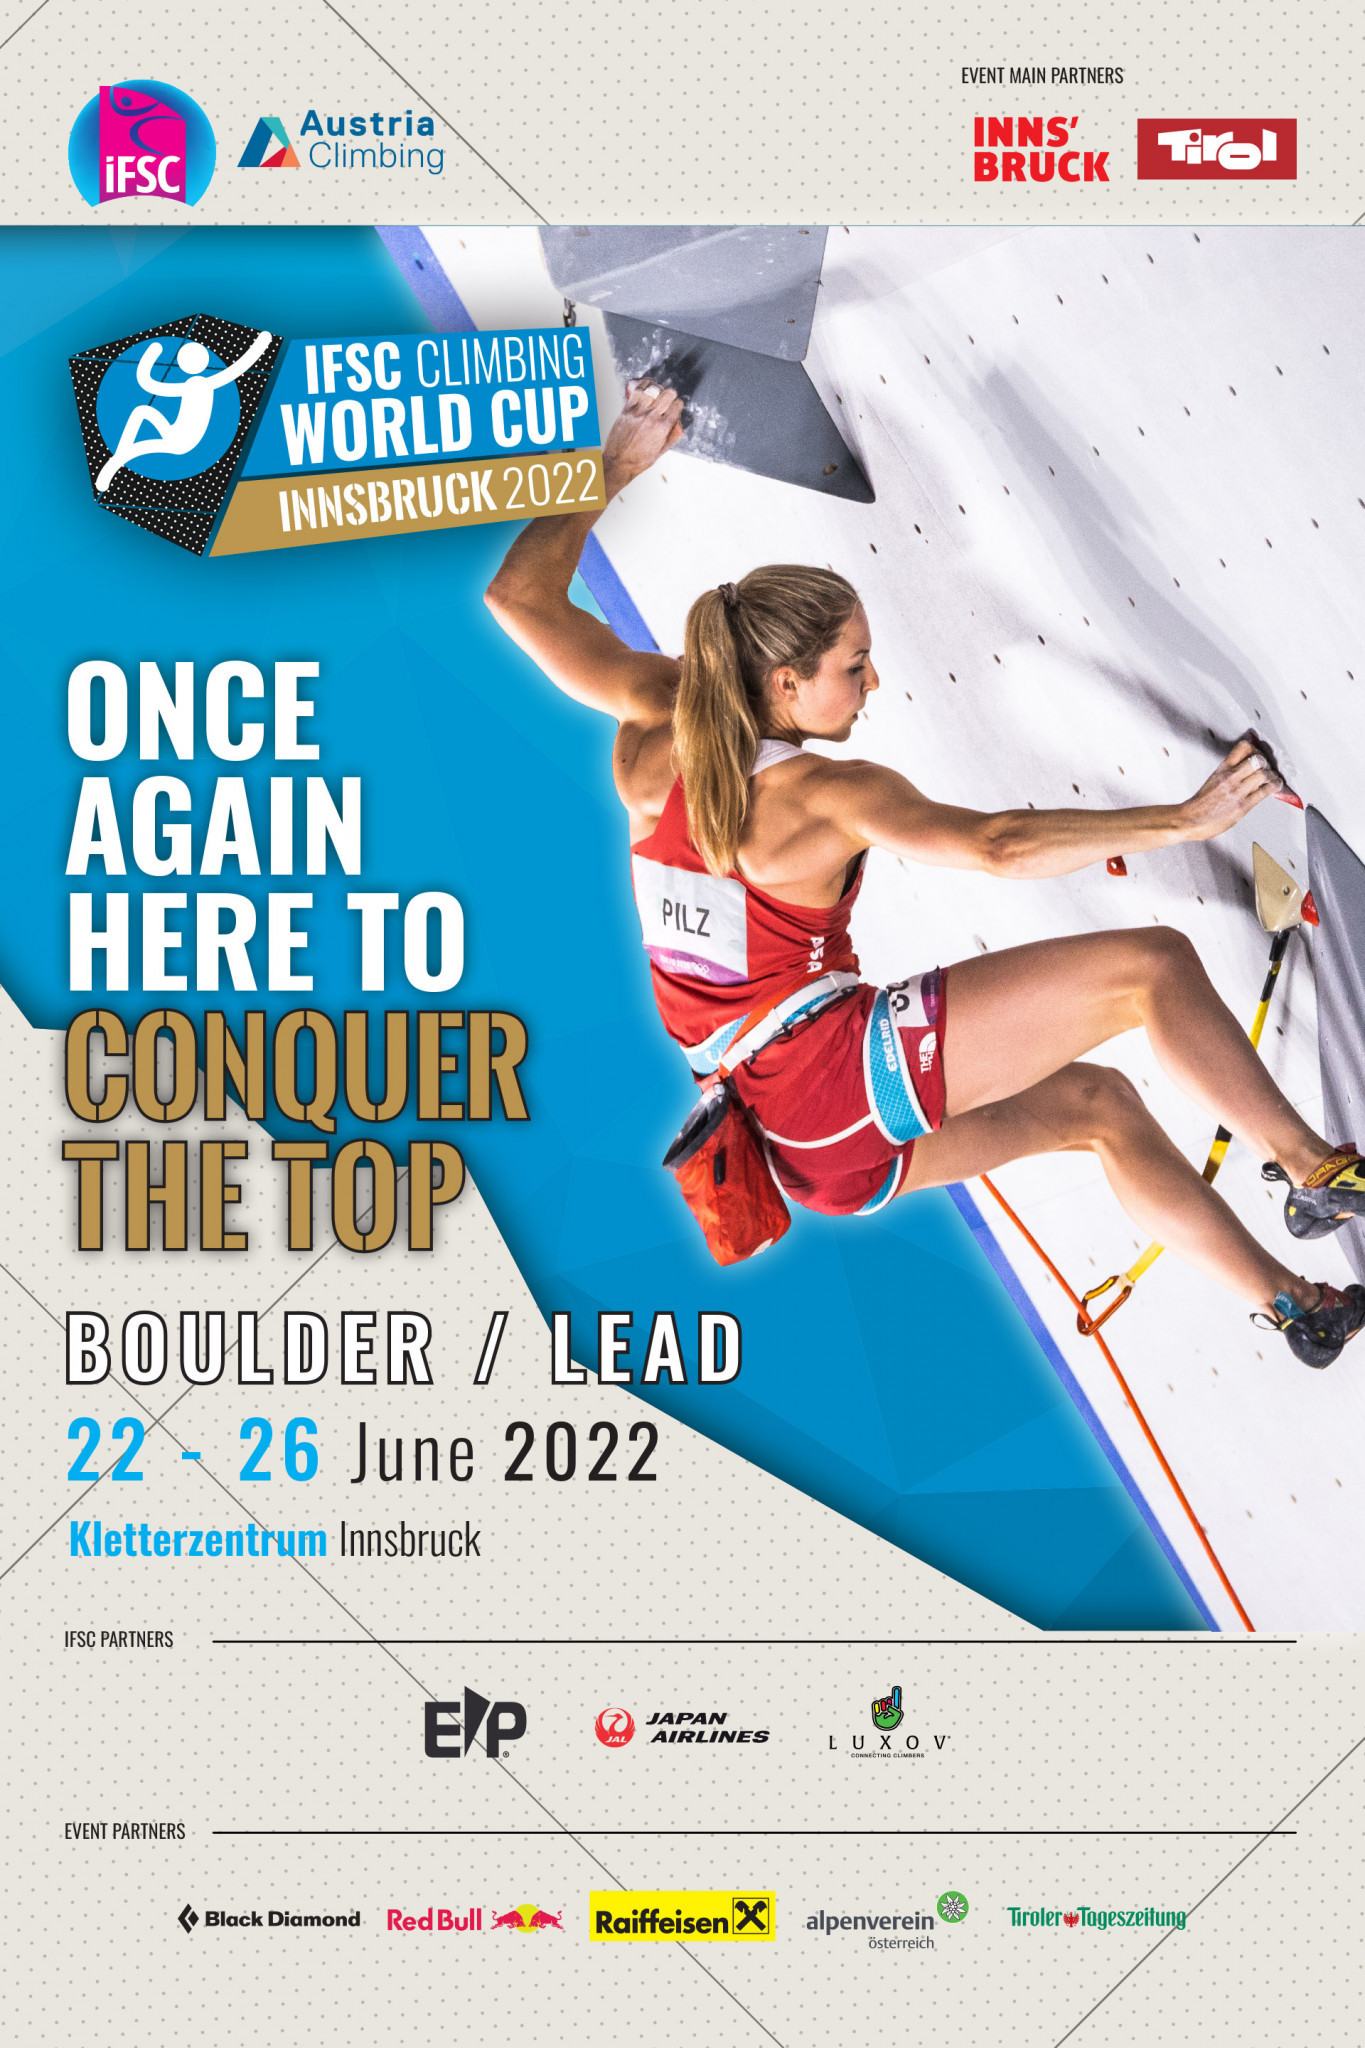 Innsbruck is set to stage the IFSC World Cup for the first time this season a week after the FISU World University Sport Climbing Championships ©IFSC